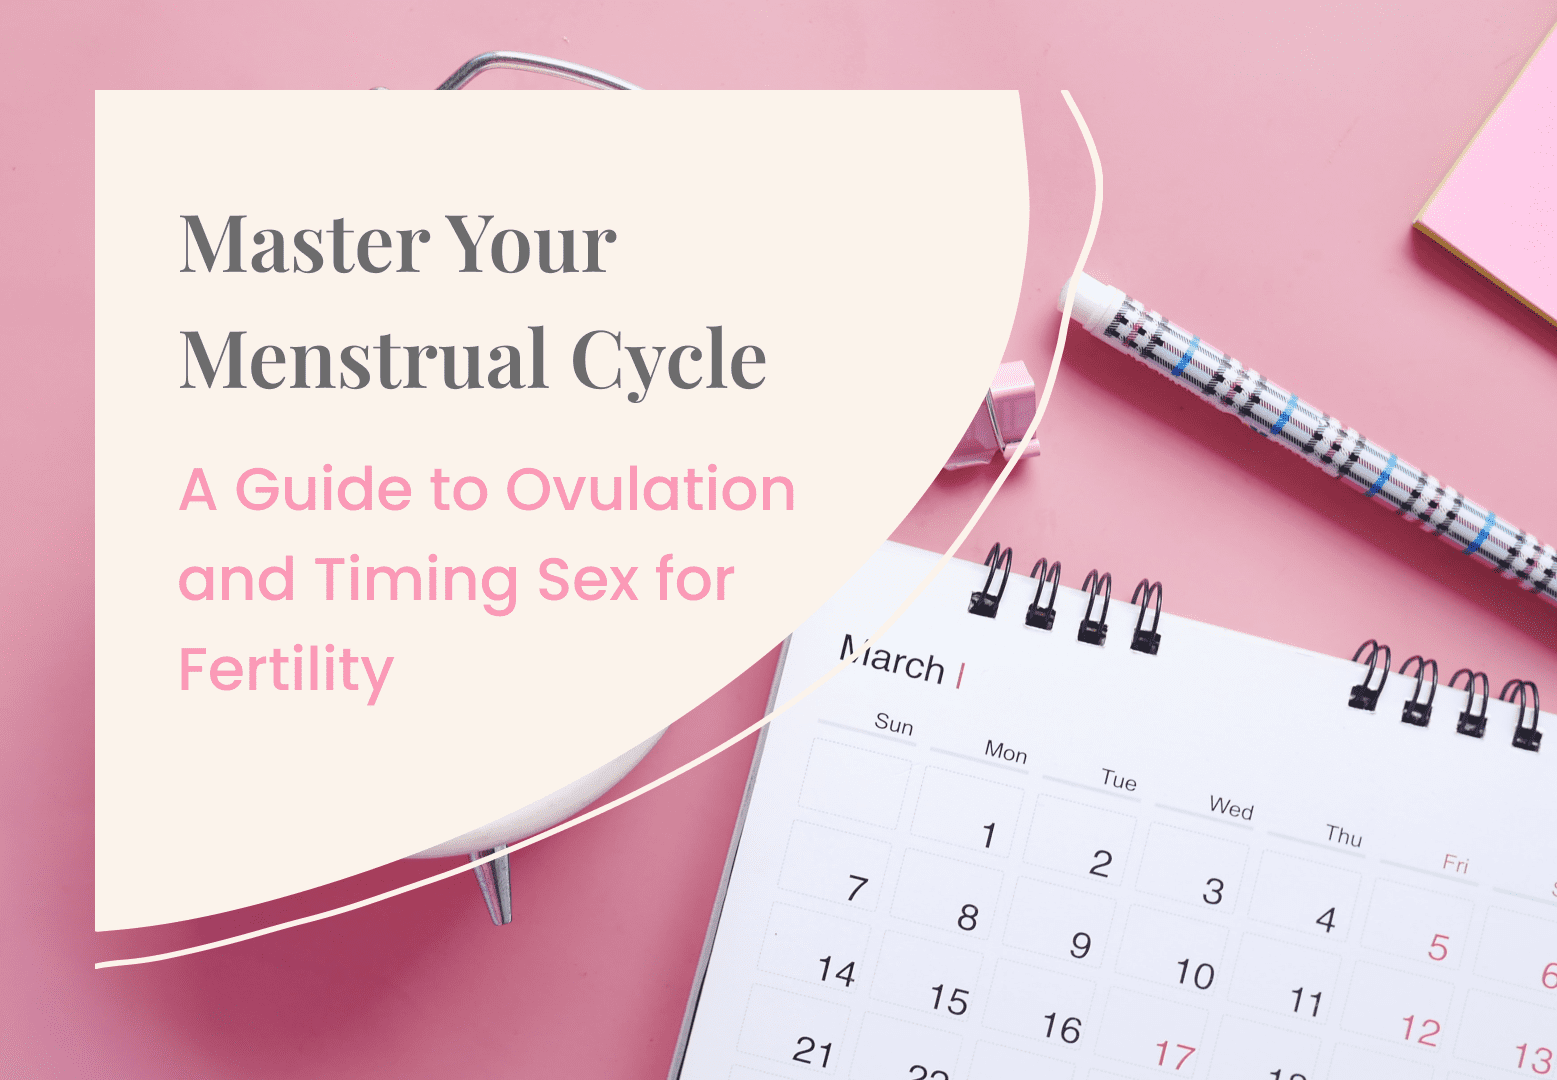 Master Your Menstrual Cycle